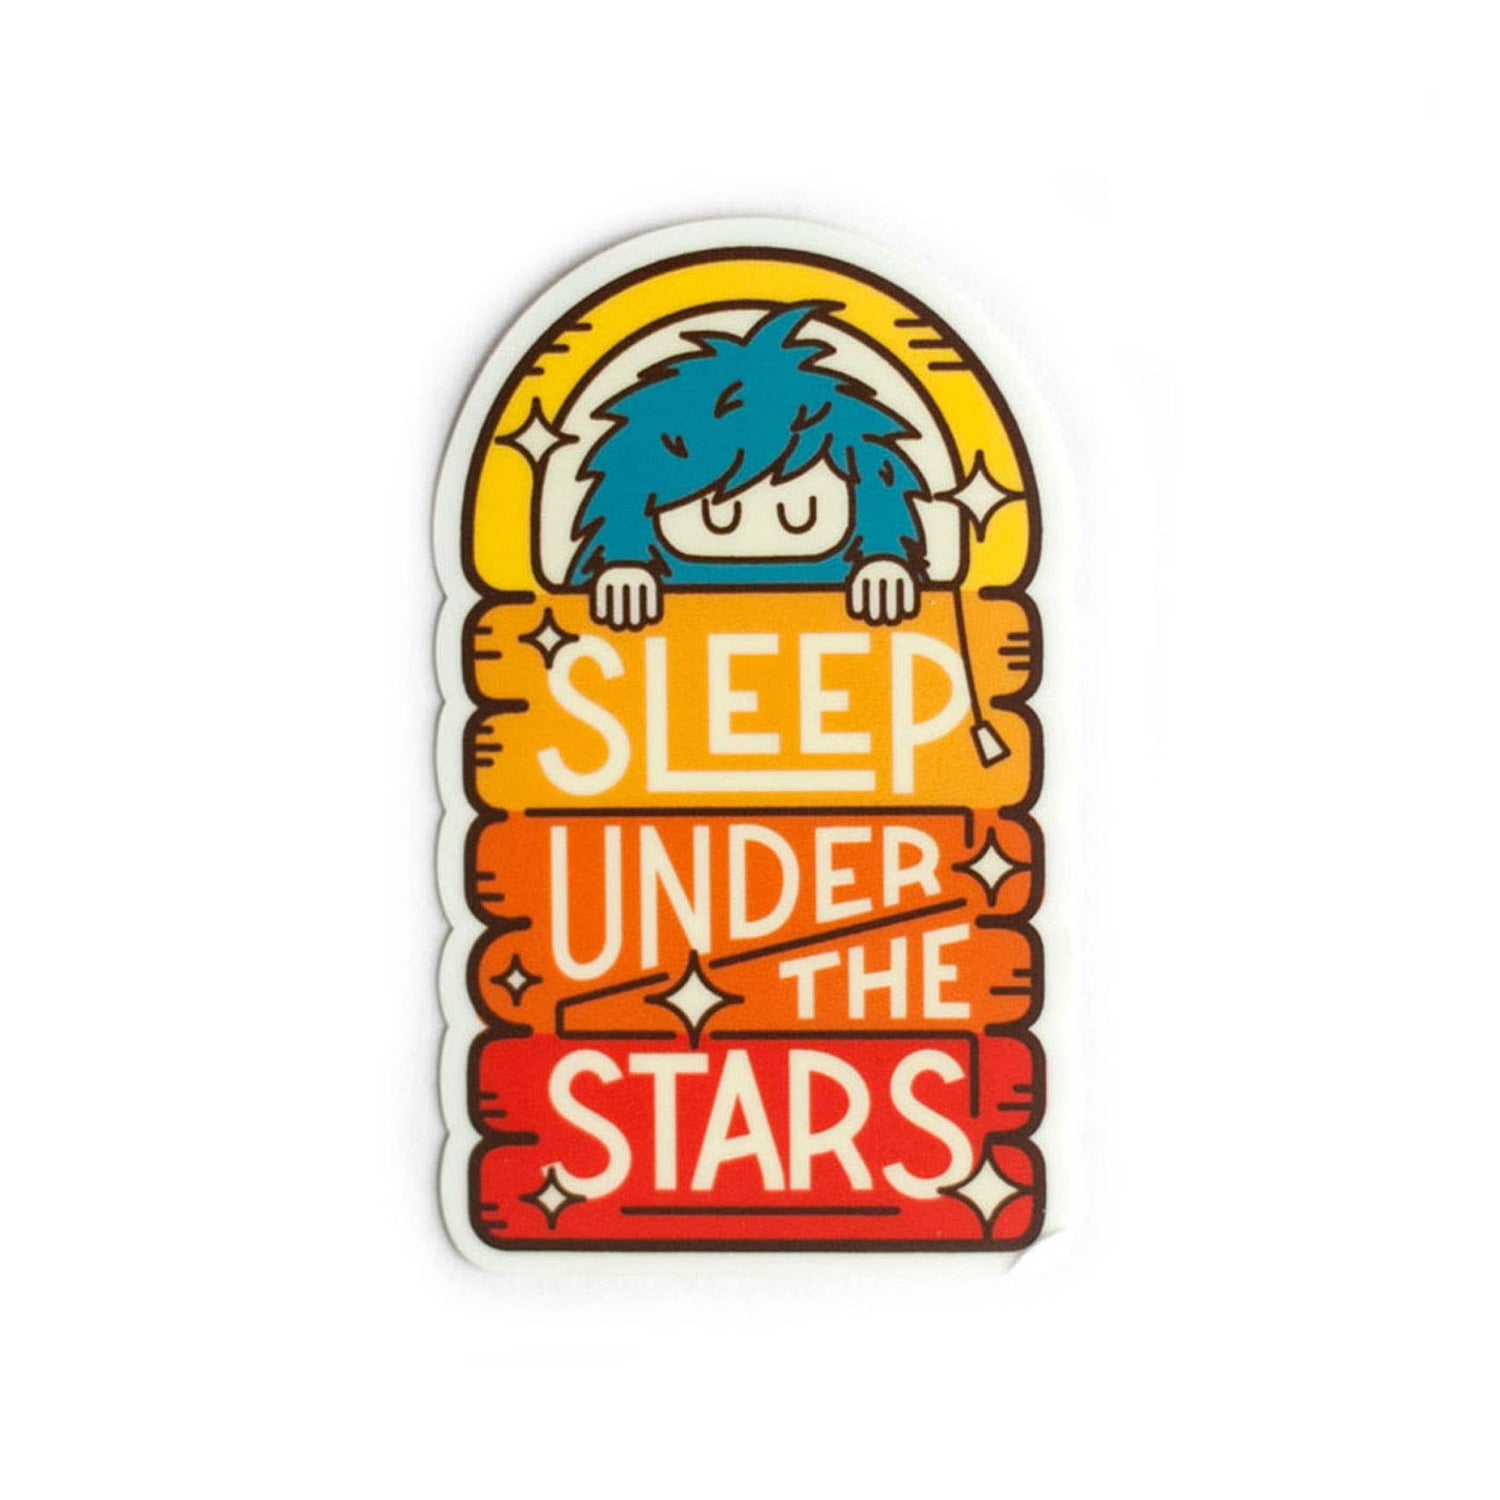 Sasquatch in a sleeping bag sticker that reads "Sleep under the stars" by Ello There